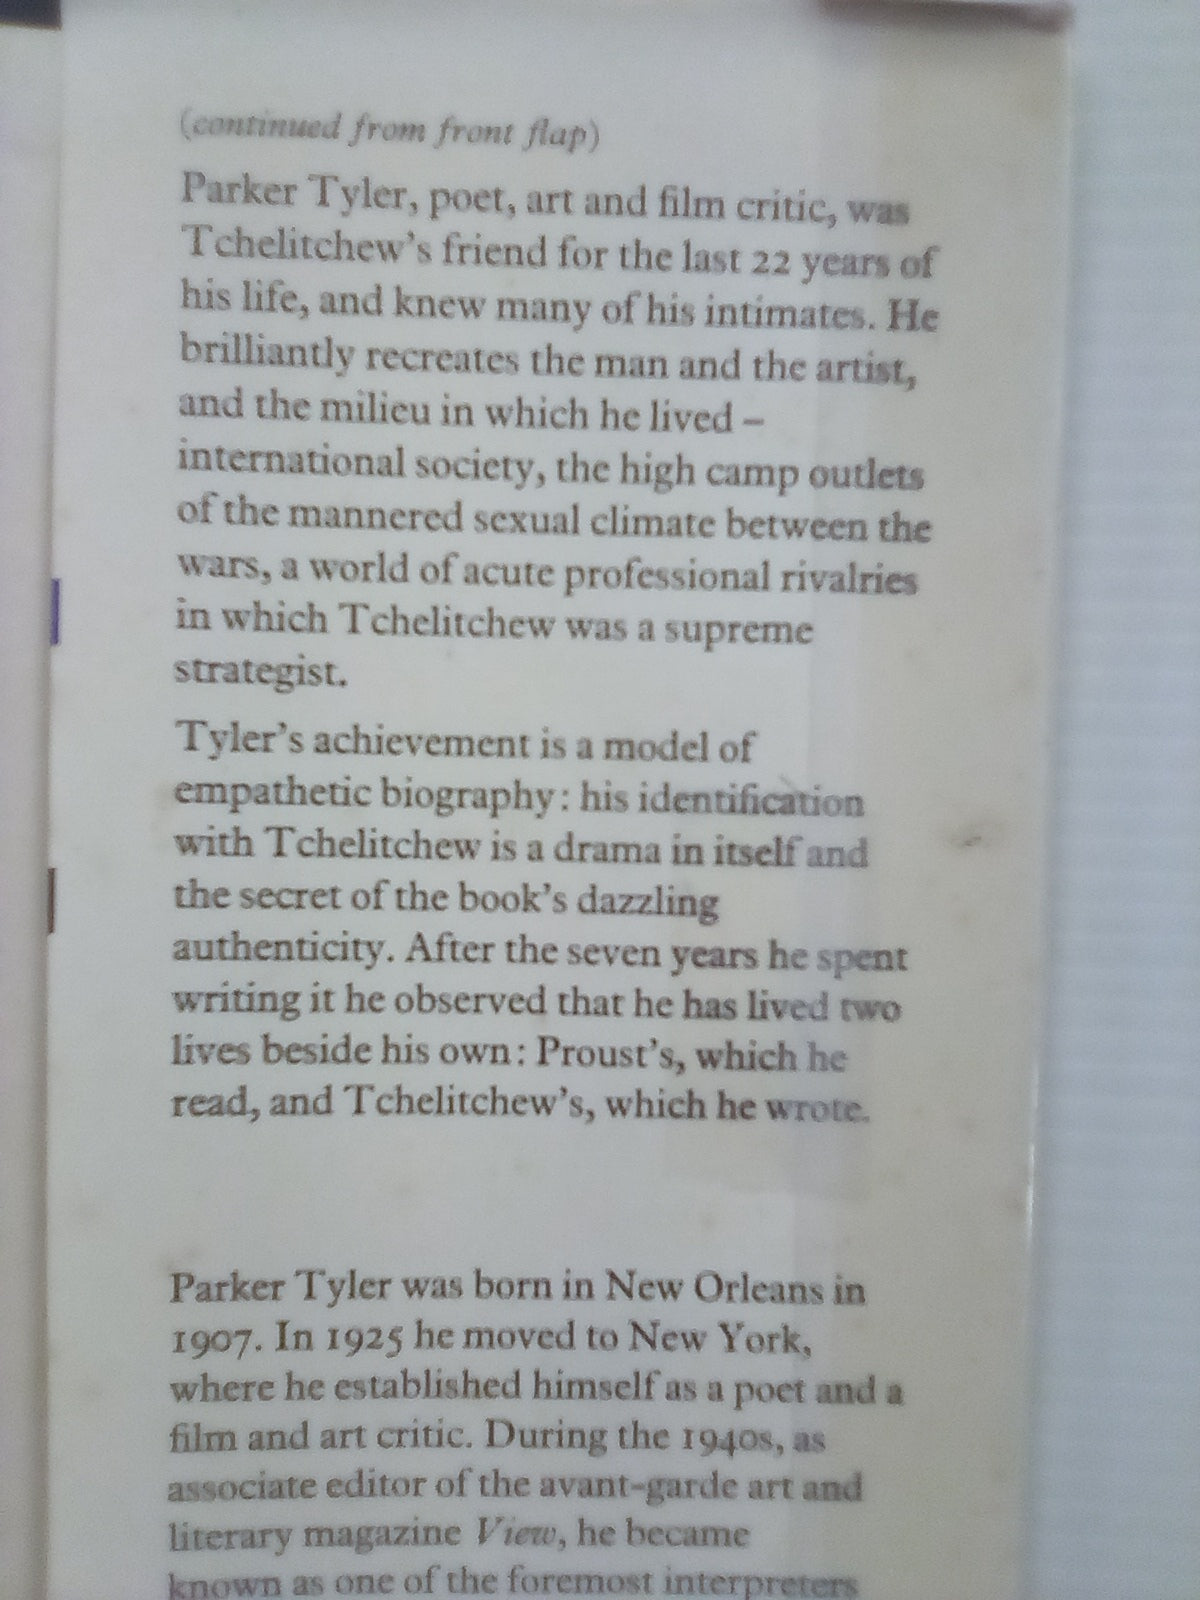 The Divine Comedy of Pavel Tchelitchew - A Biography by Parker Tyler